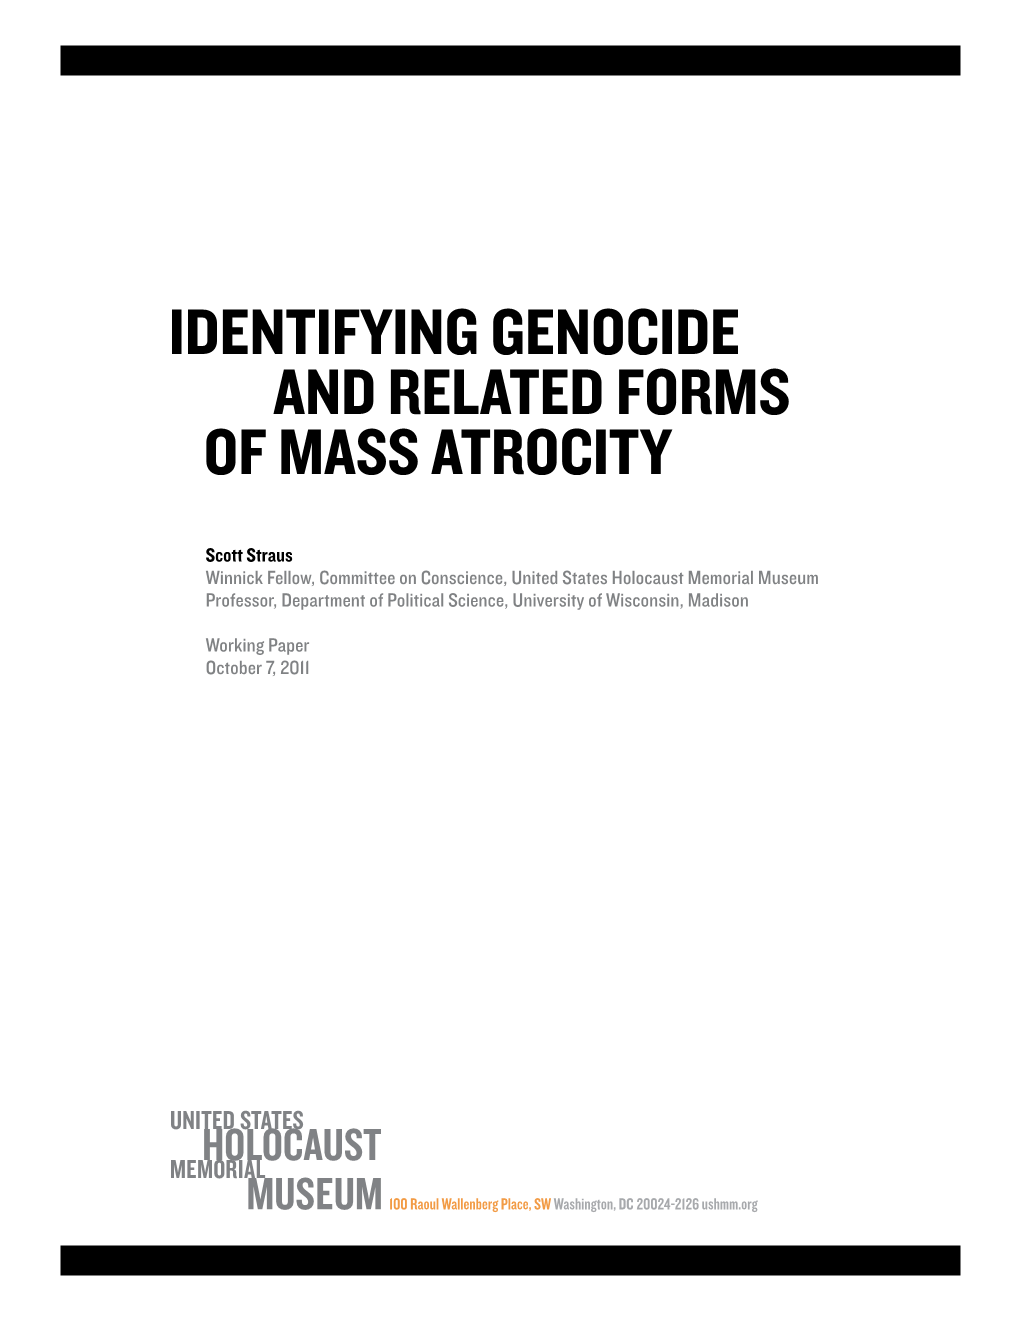 Identifying Genocide and Related Forms of Mass Atrocity